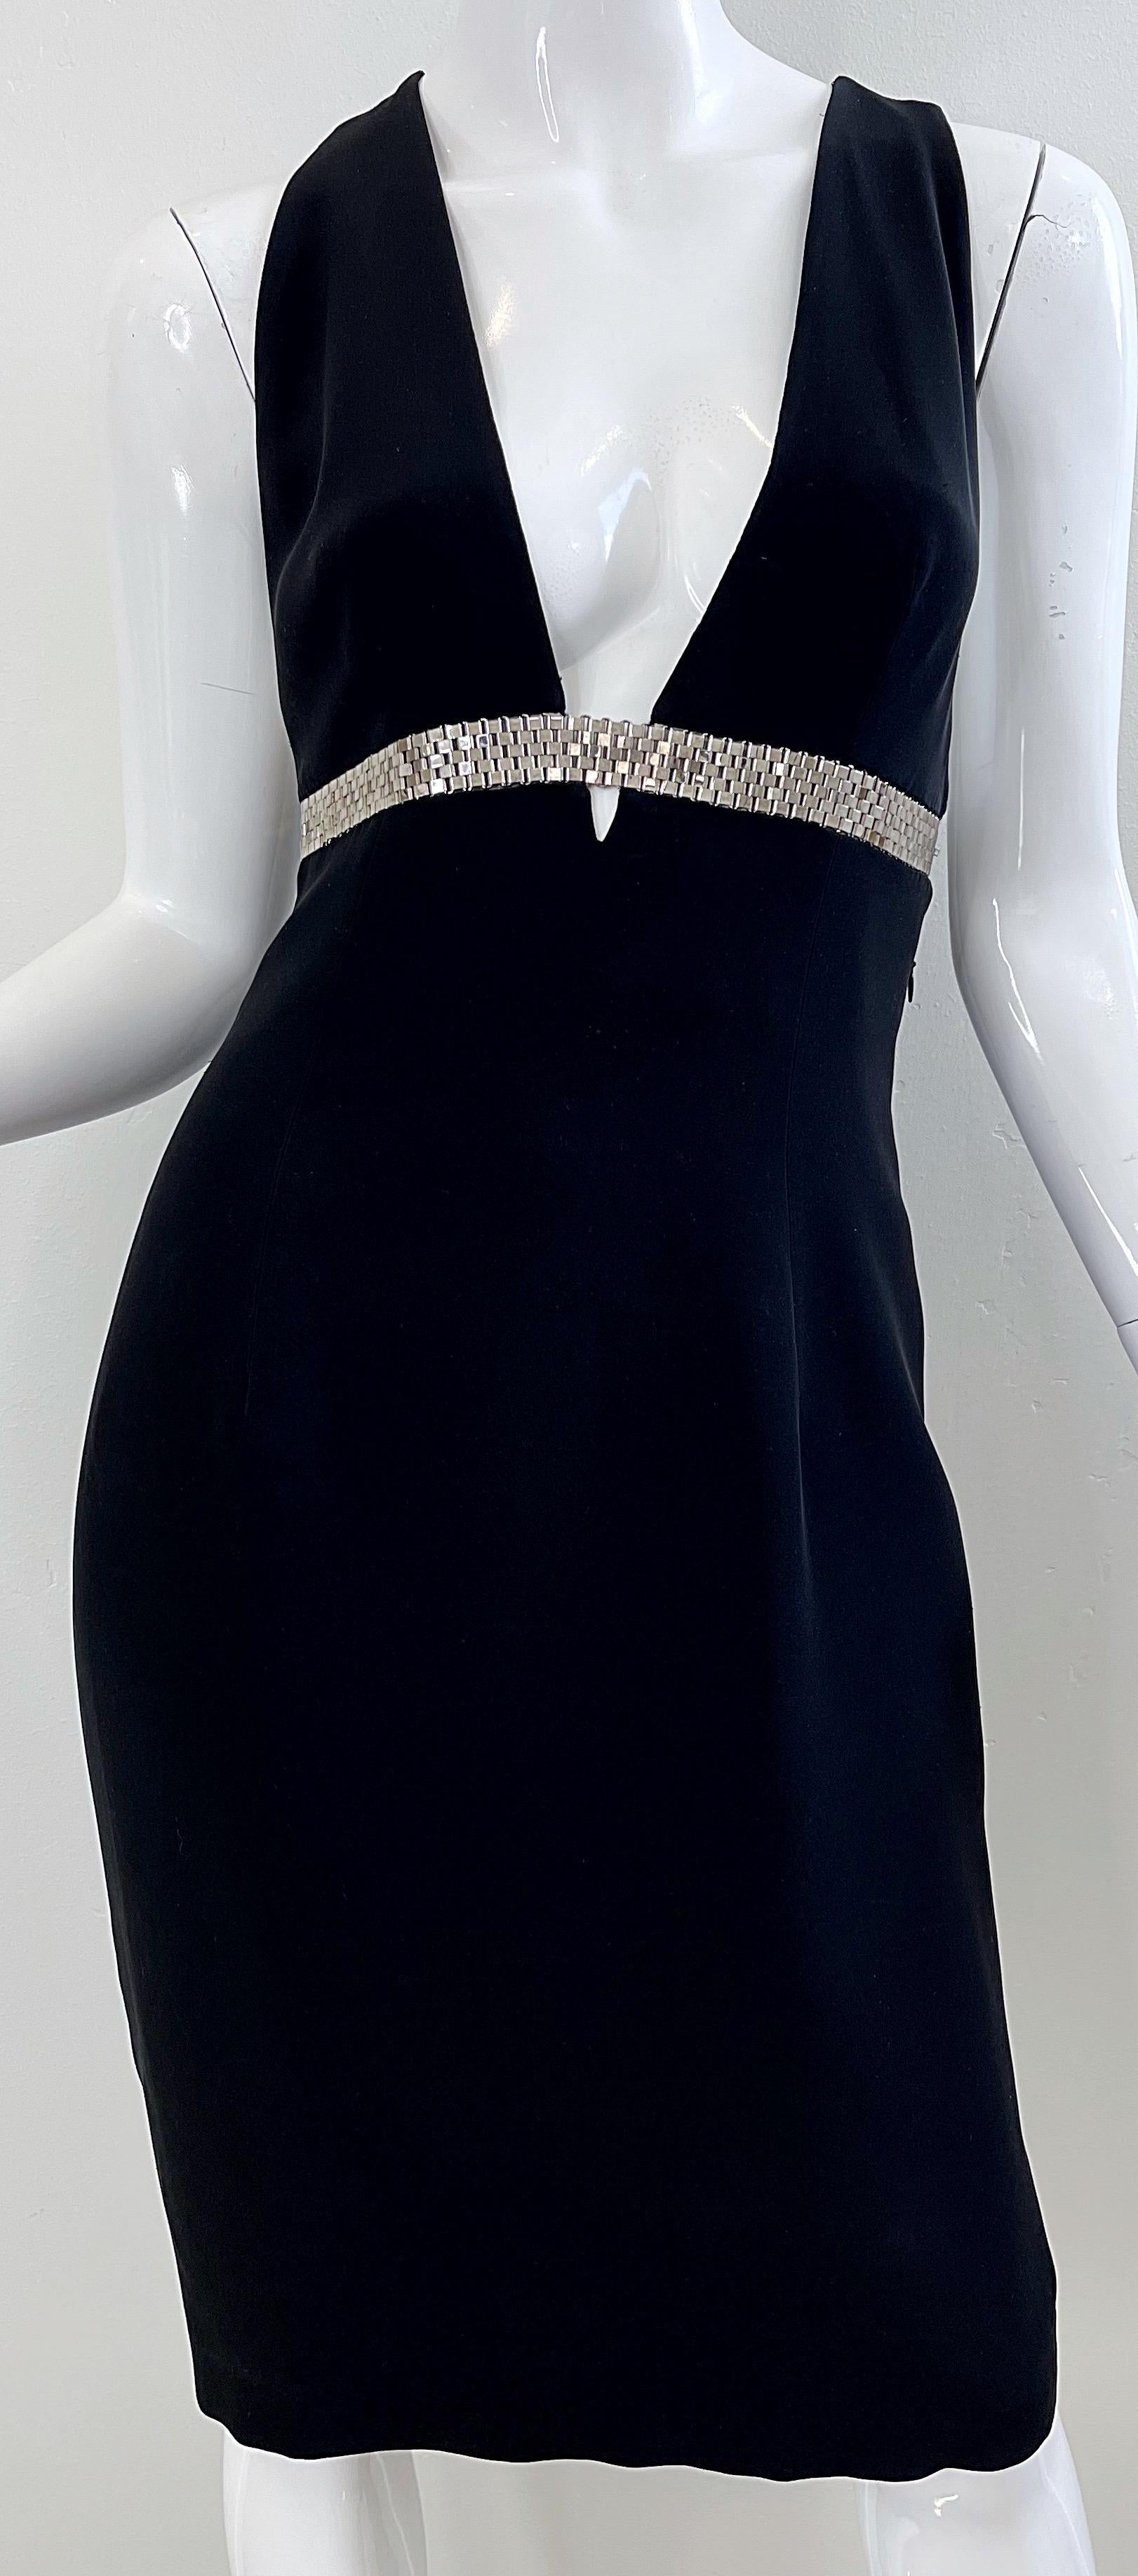 Givenchy Ricardo Tisci Size 40 / 6 - 8 Black Watch Link Silk Plunging Dress For Sale 4